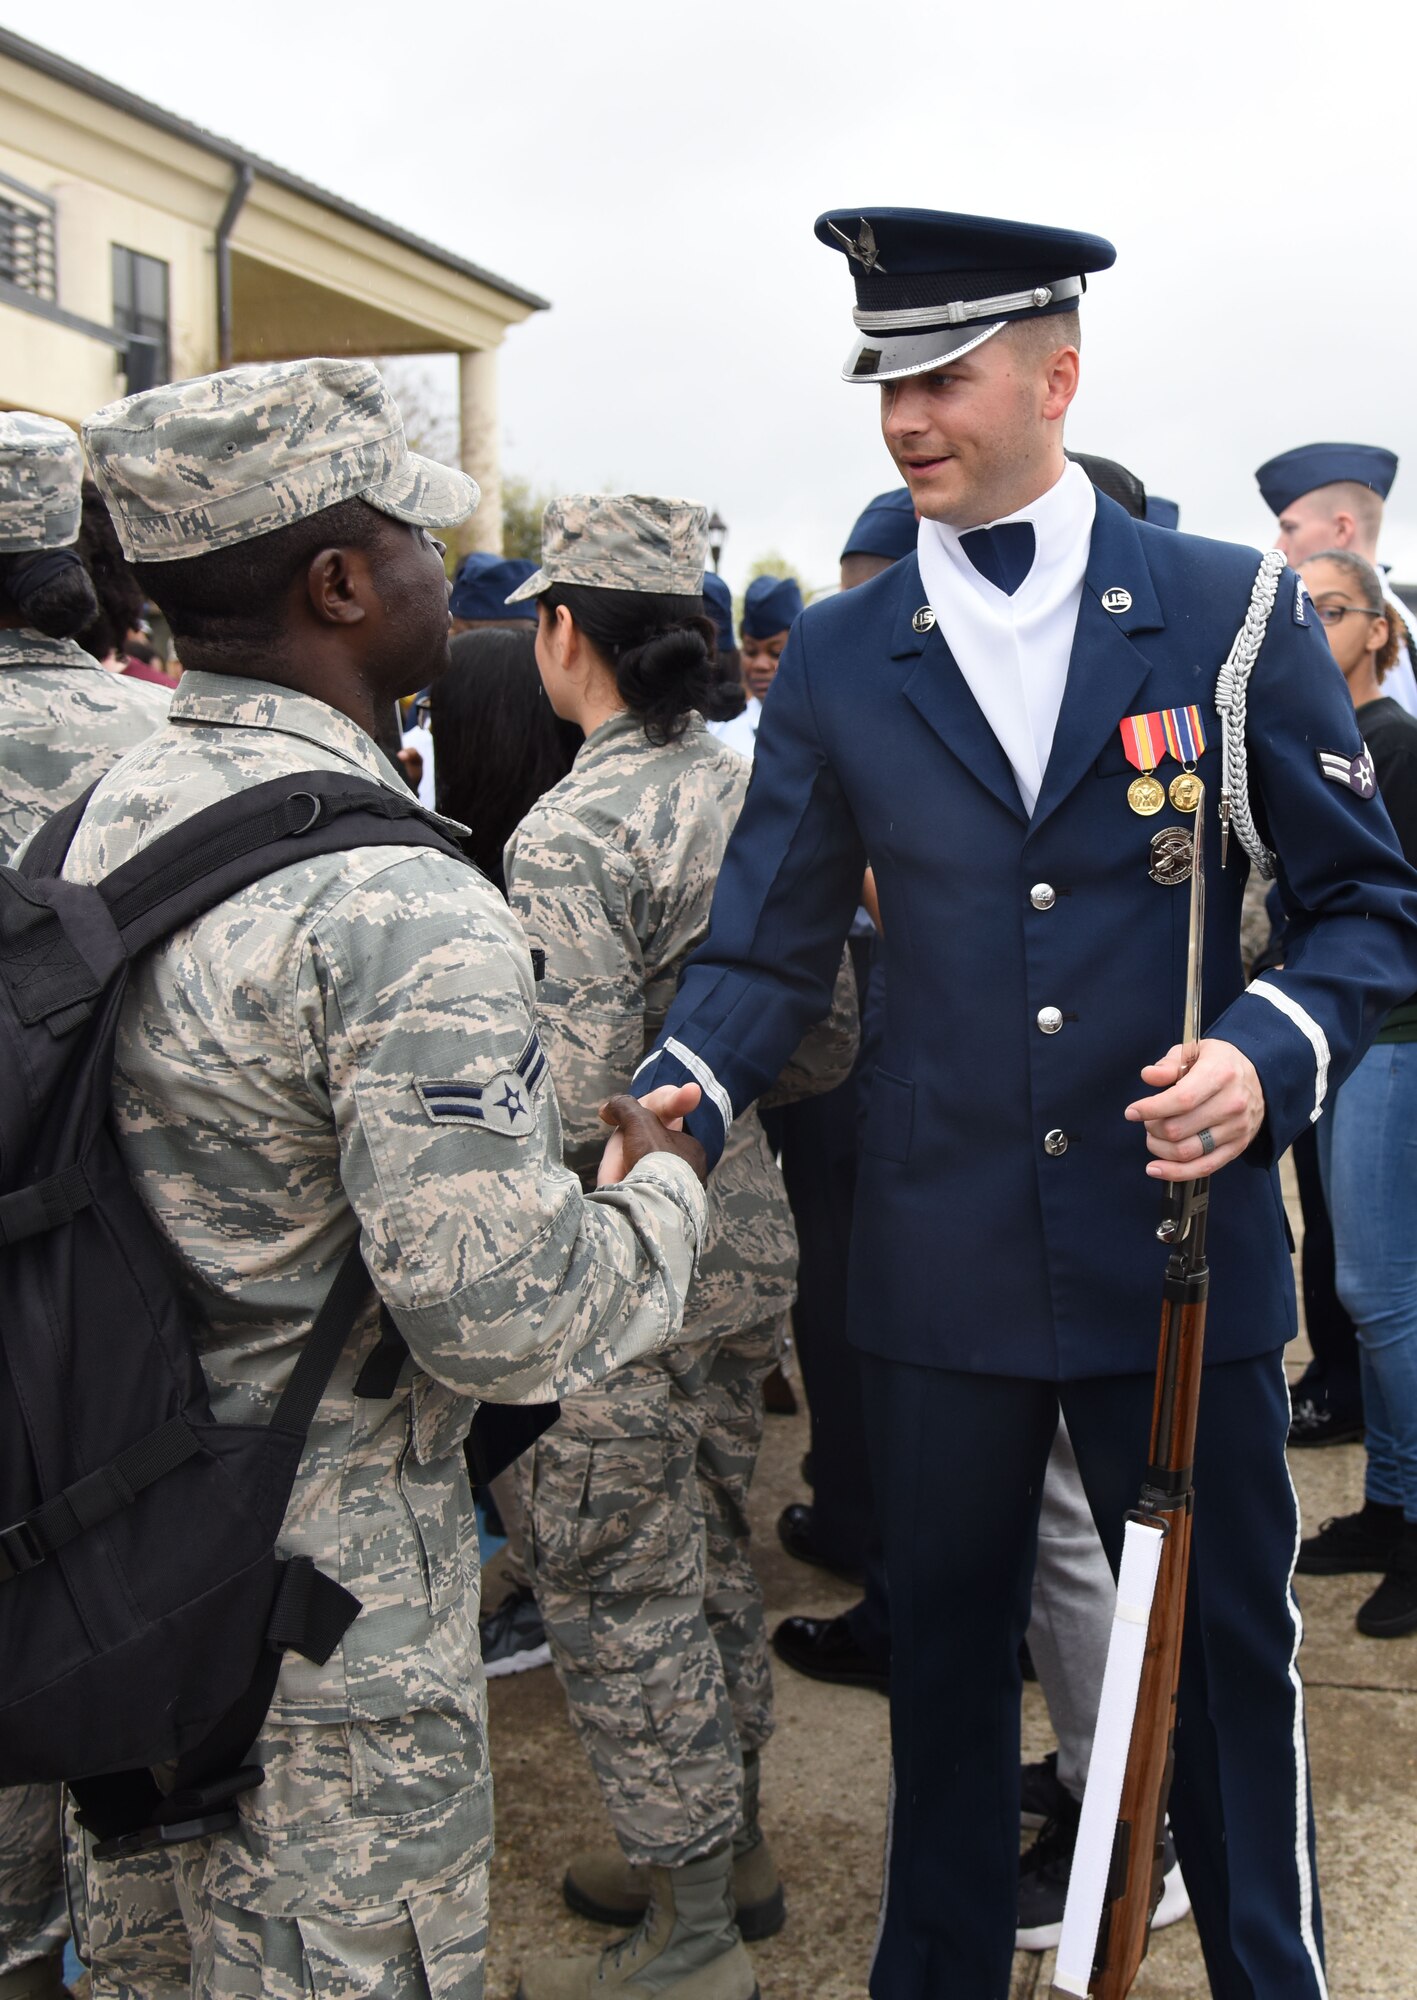 Airman 1st Class Emmanuel Agyemang Duah, 335th Training Squadron student, meets Airman 1st Class Caleb Gothard, U.S. Air Force Honor Guard Drill Team member, following the debut performance of the team’s 2017 routine during the 81st Training Group drill down at the Levitow Training Support Facility drill pad March 10, 2017, on Keesler Air Force Base, Miss. The team comes to Keesler every year for five weeks to develop a new routine that they will use throughout the year. (U.S. Air Force photo by Kemberly Groue)